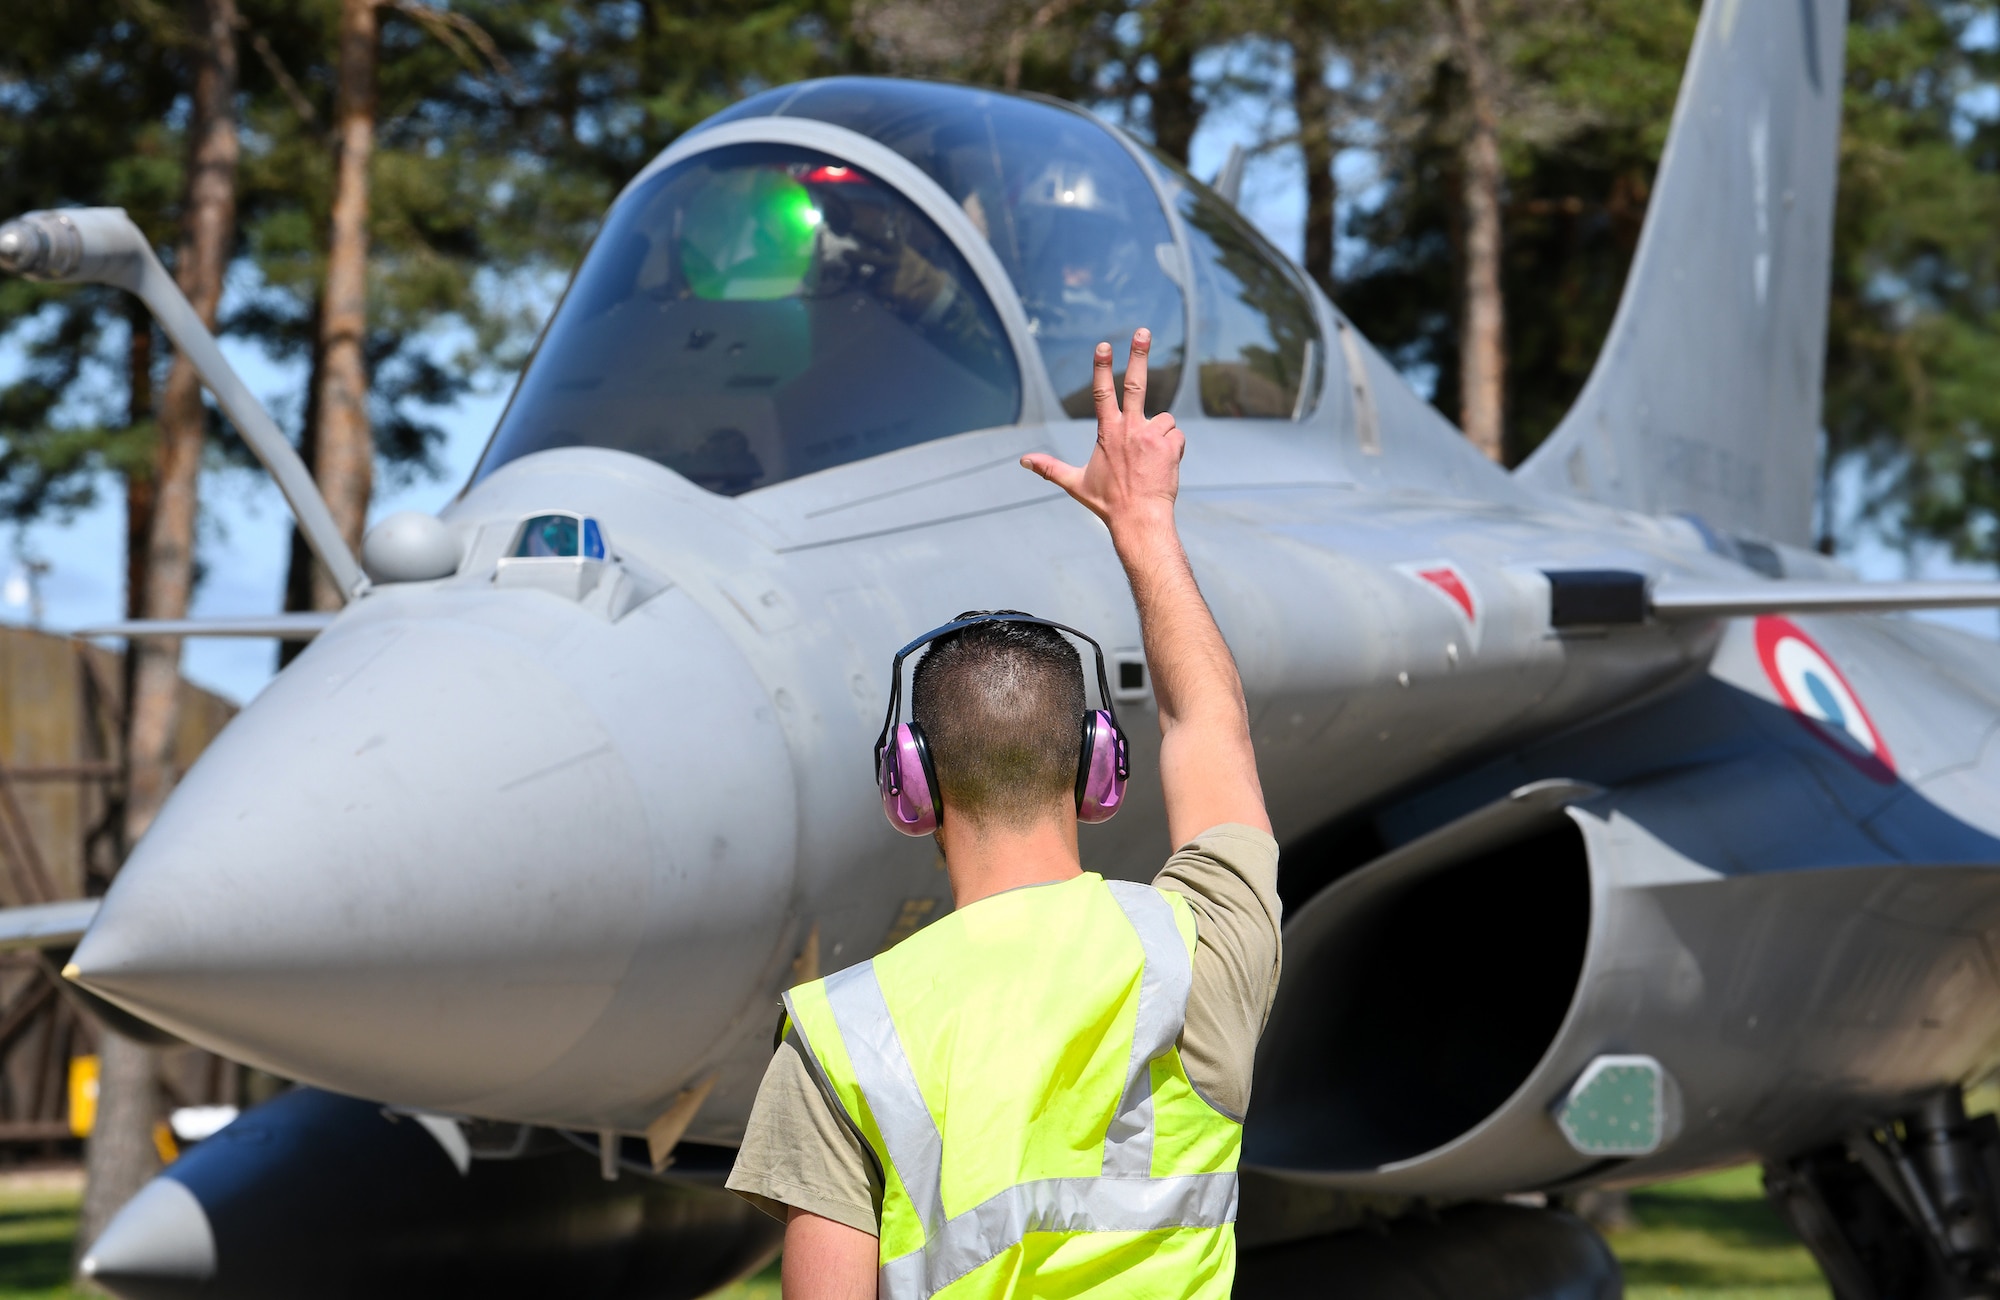 A French Air Force maintainer signals a Rafale pilot during exercise Point Blank 19-2 at Royal Air Force Lakenheath, England, June 17, 2019. During this trilateral exercise, participating air forces are enhancing professional relationships and improving overall coordination with allies and partner militaries during times of crisis. (U.S. Air Force photo by Staff Sgt. Alex Fox Echols III/Released)